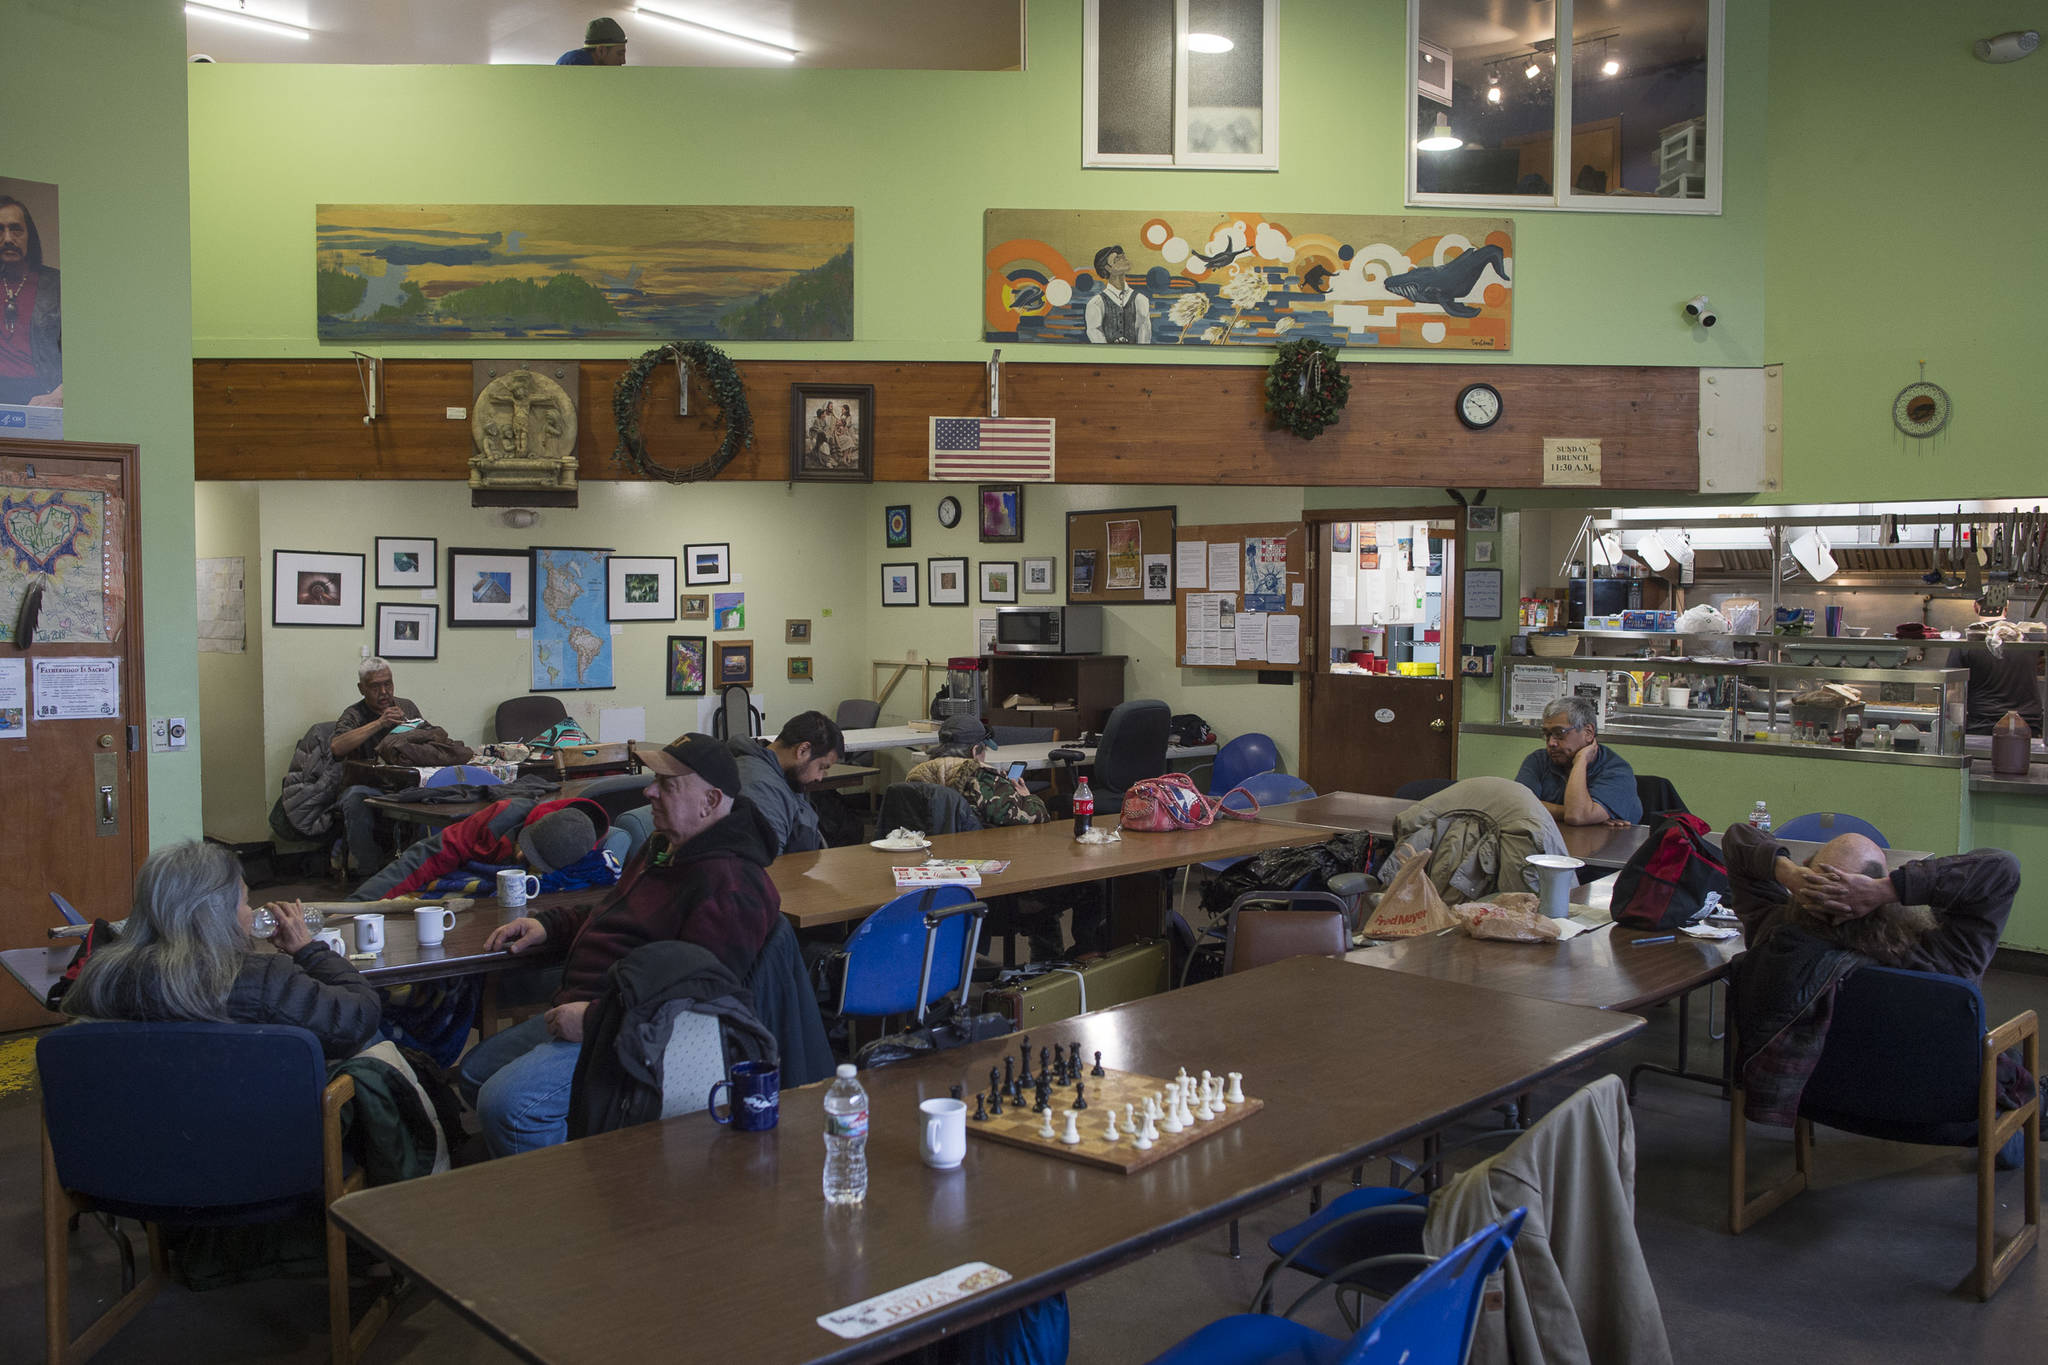 The Glory Hall is Juneau’s homeless shelter and soup kitchen located on South Franklin Street, pictured here on Friday, March 15, 2019. (Michael Penn | Juneau Empire)